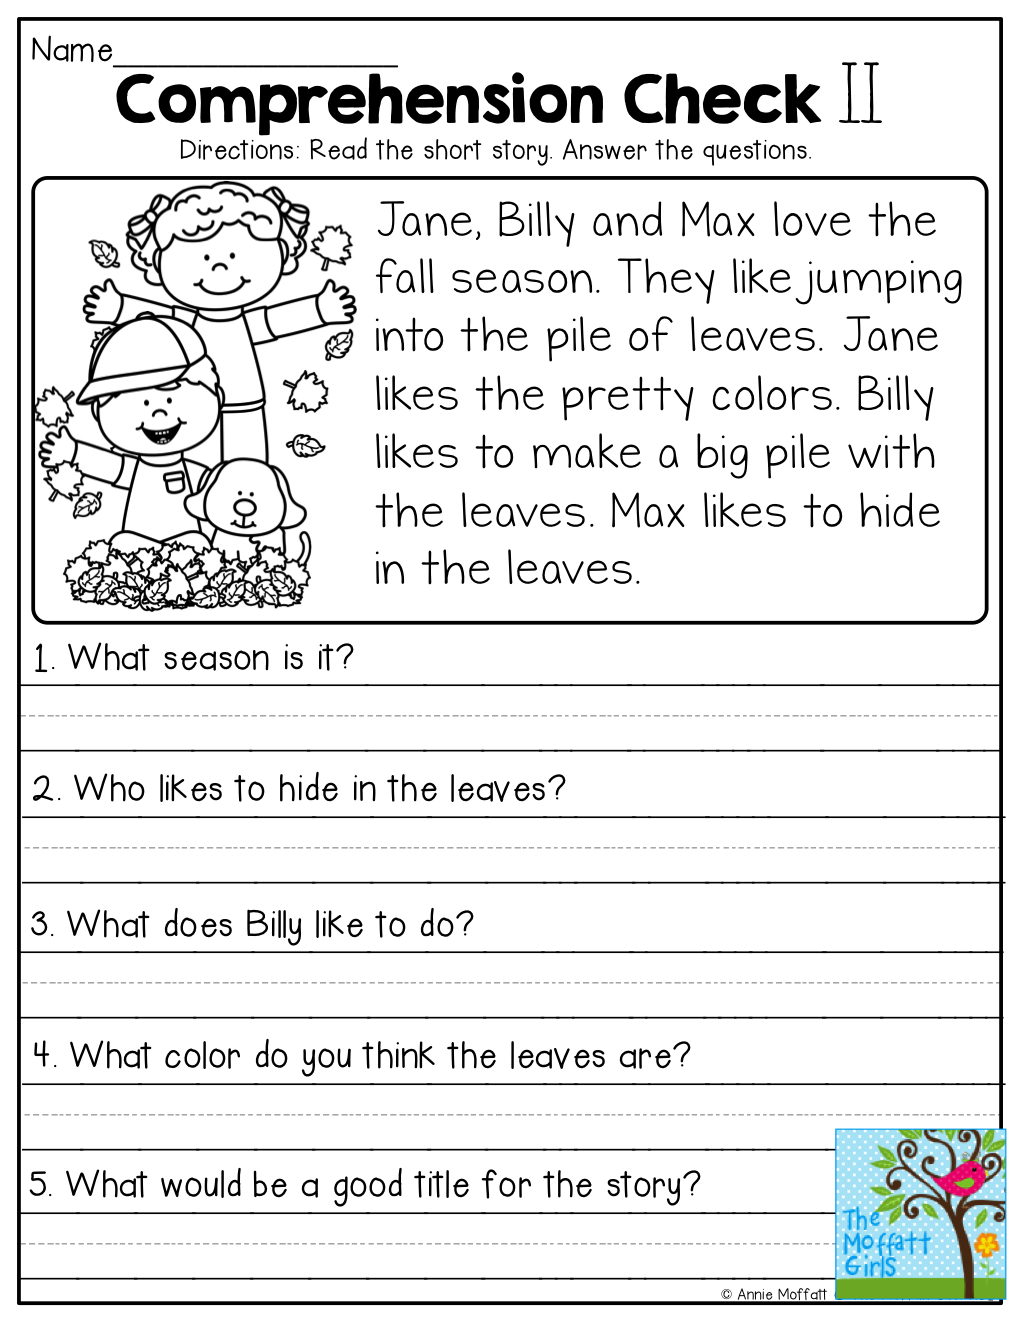 Comprehension Checks And So Many More Useful Printables! | Test Of | Free Printable Grade 1 Reading Comprehension Worksheets